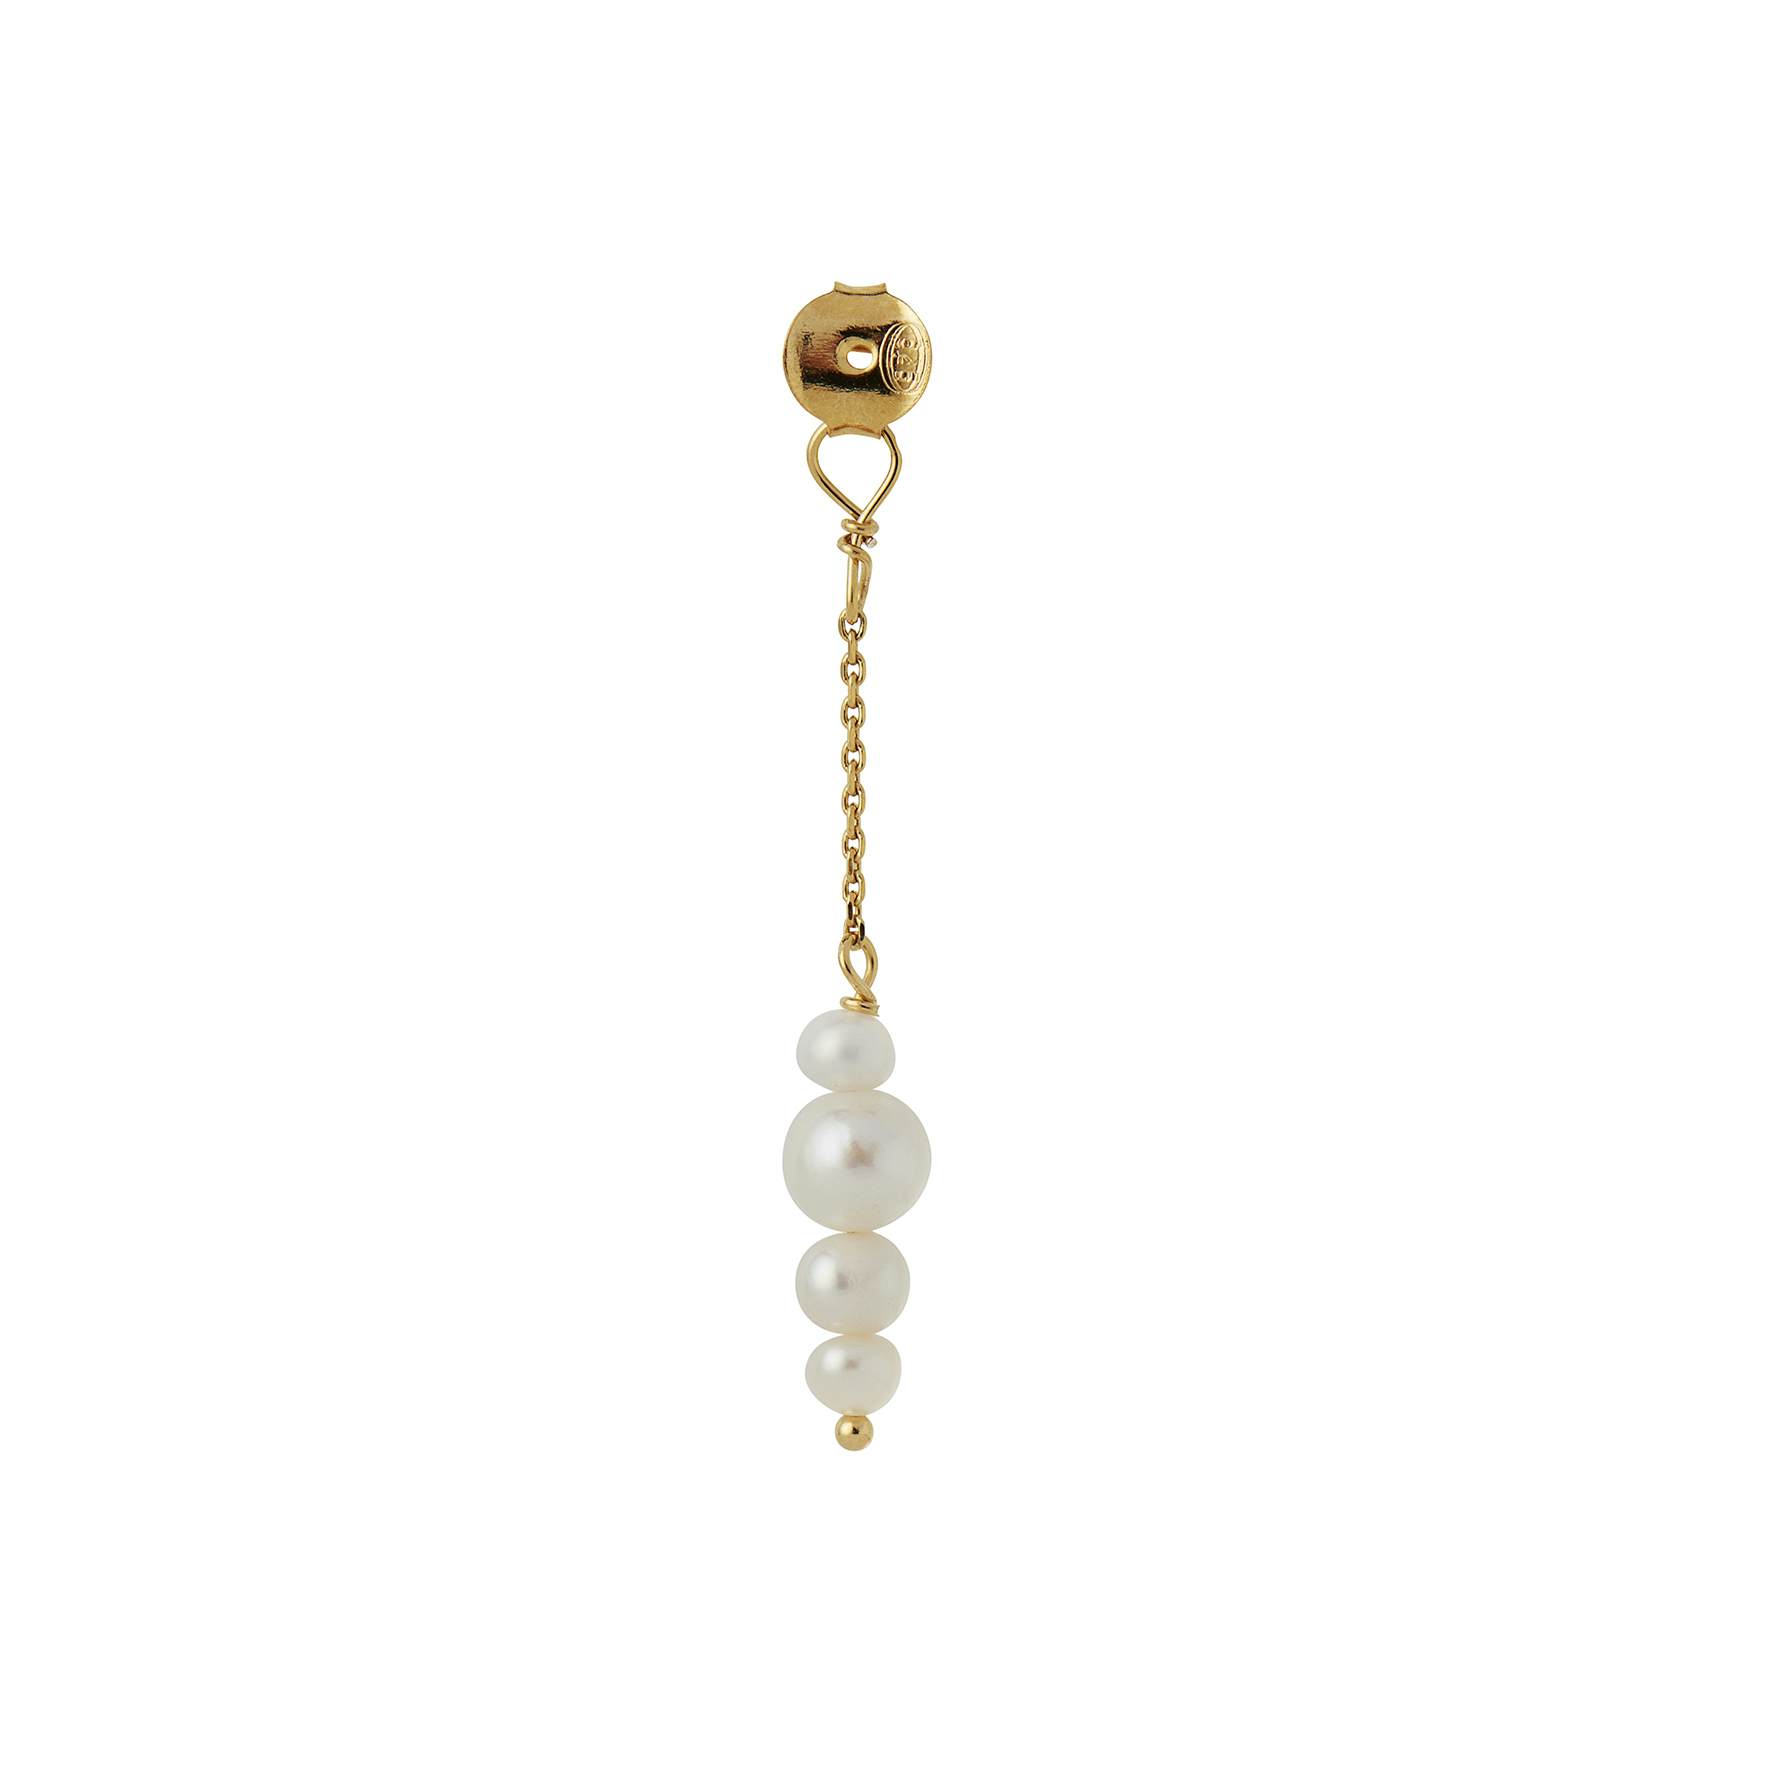 Pearl Berries Behind Ear Earring fra STINE A Jewelry i Forgylt-Sølv Sterling 925